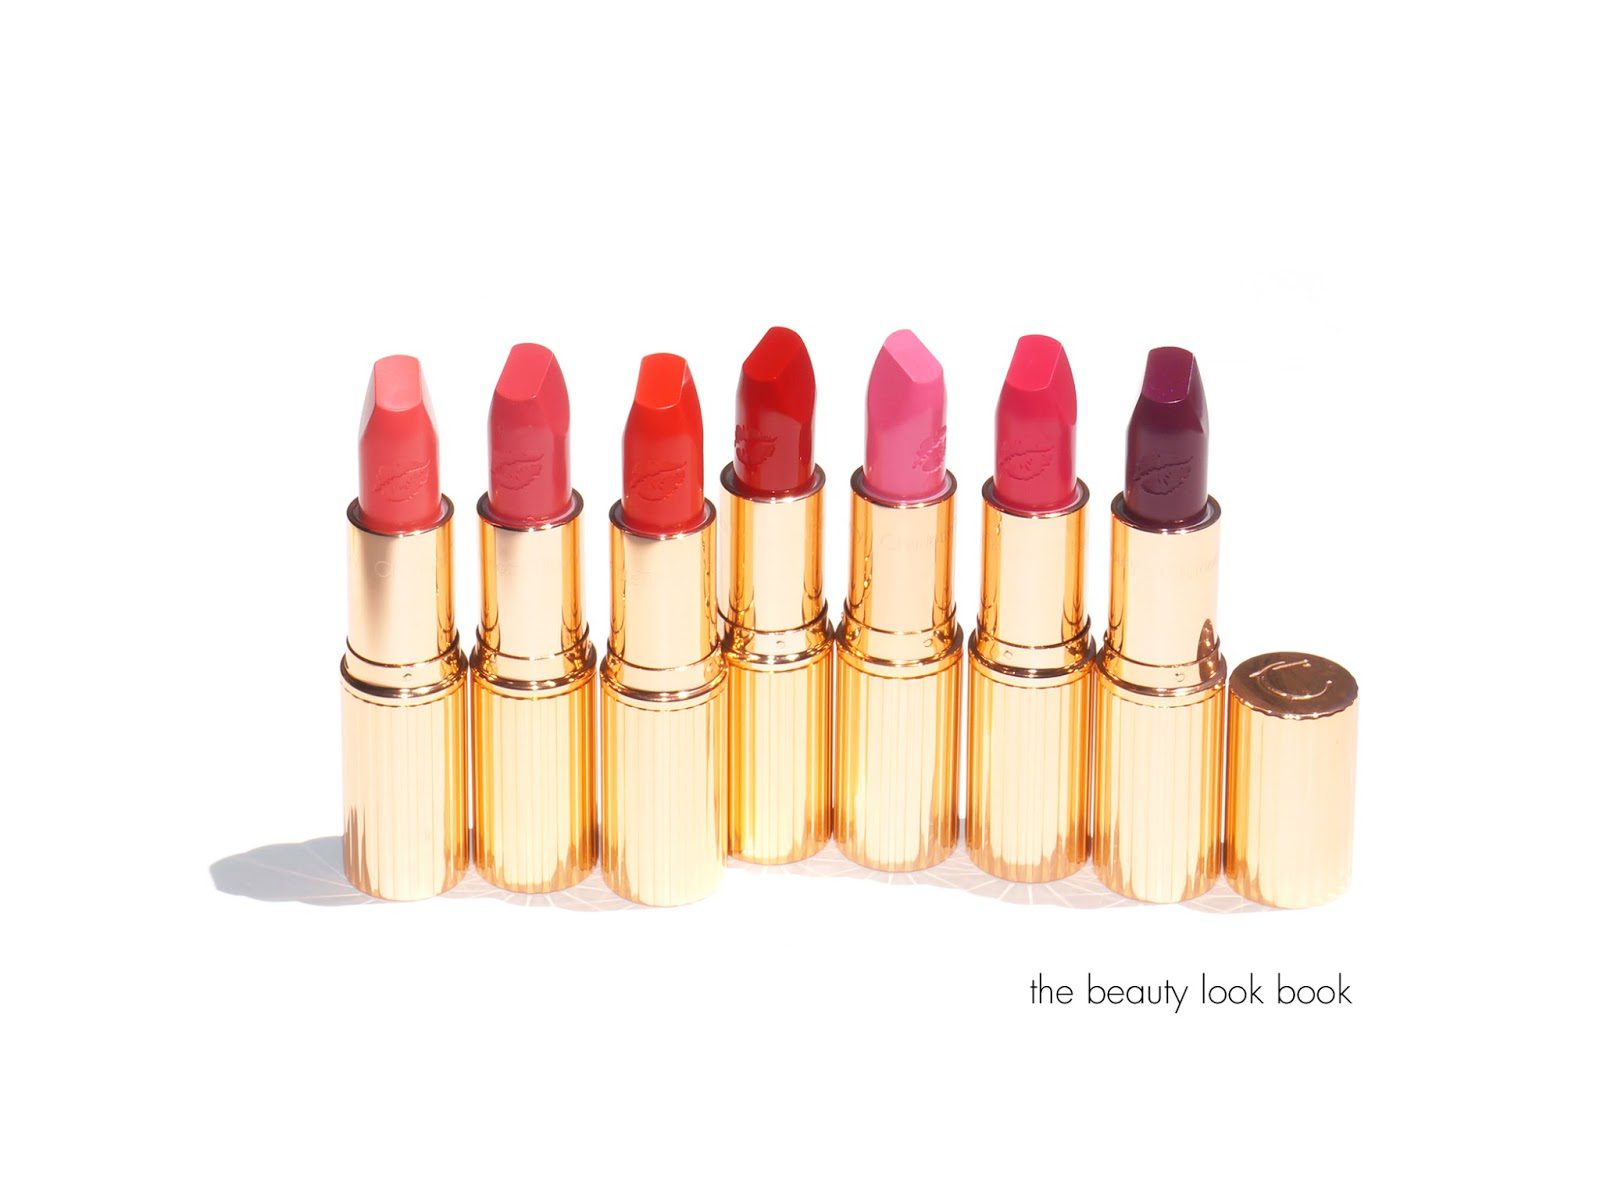 Charlotte Tilbury Hot Lips Collection Review - The Beauty Look Book